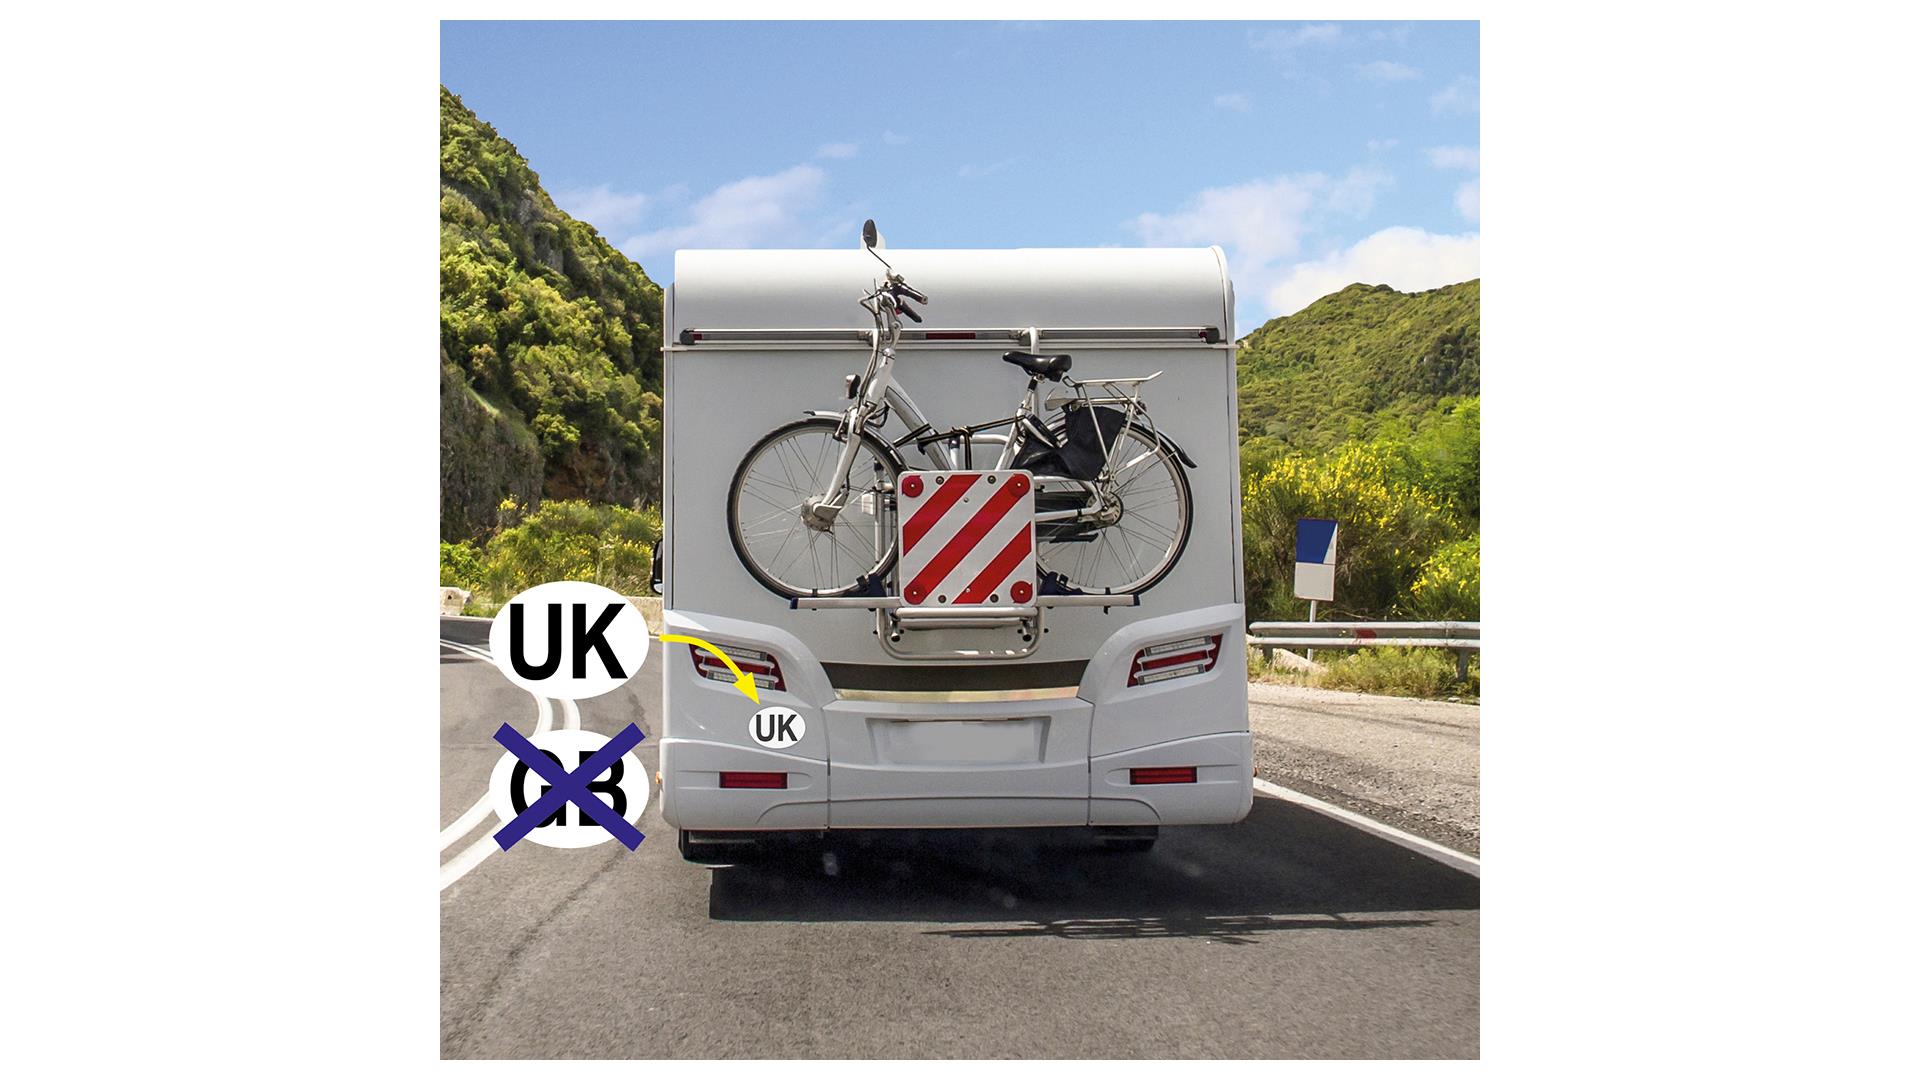 Motorhome safety on the road